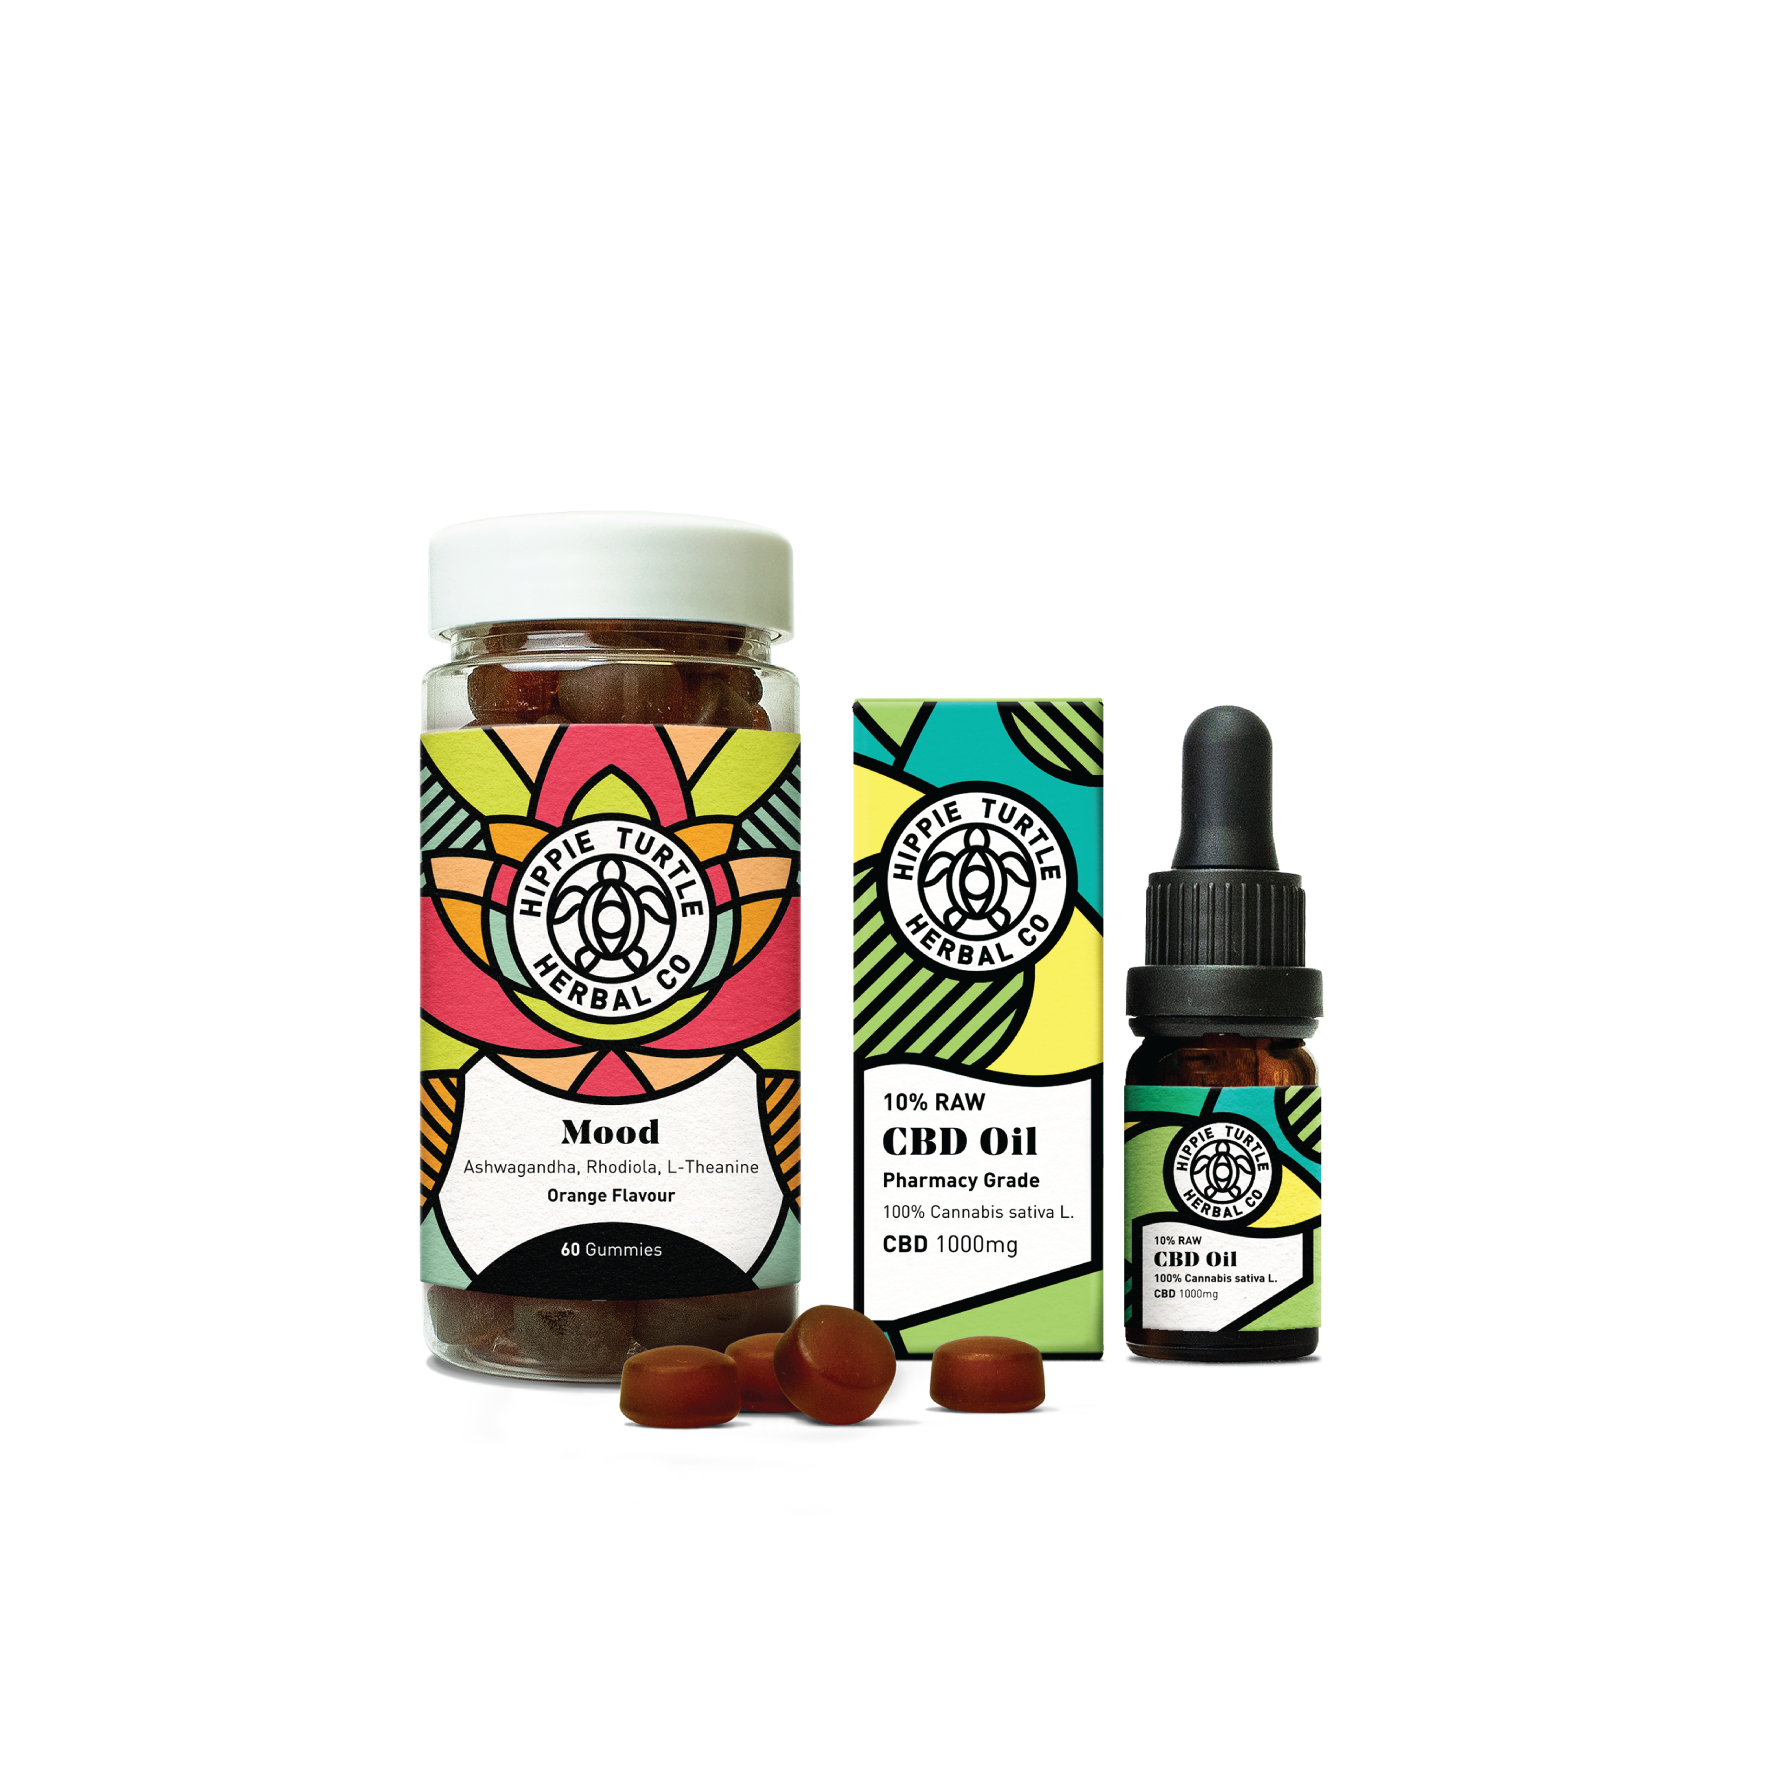 Mood essentials to help anxiety and stress reducing mood support nootropic gummies and pharmacy grade CBD oils for mood, stress and anxiety